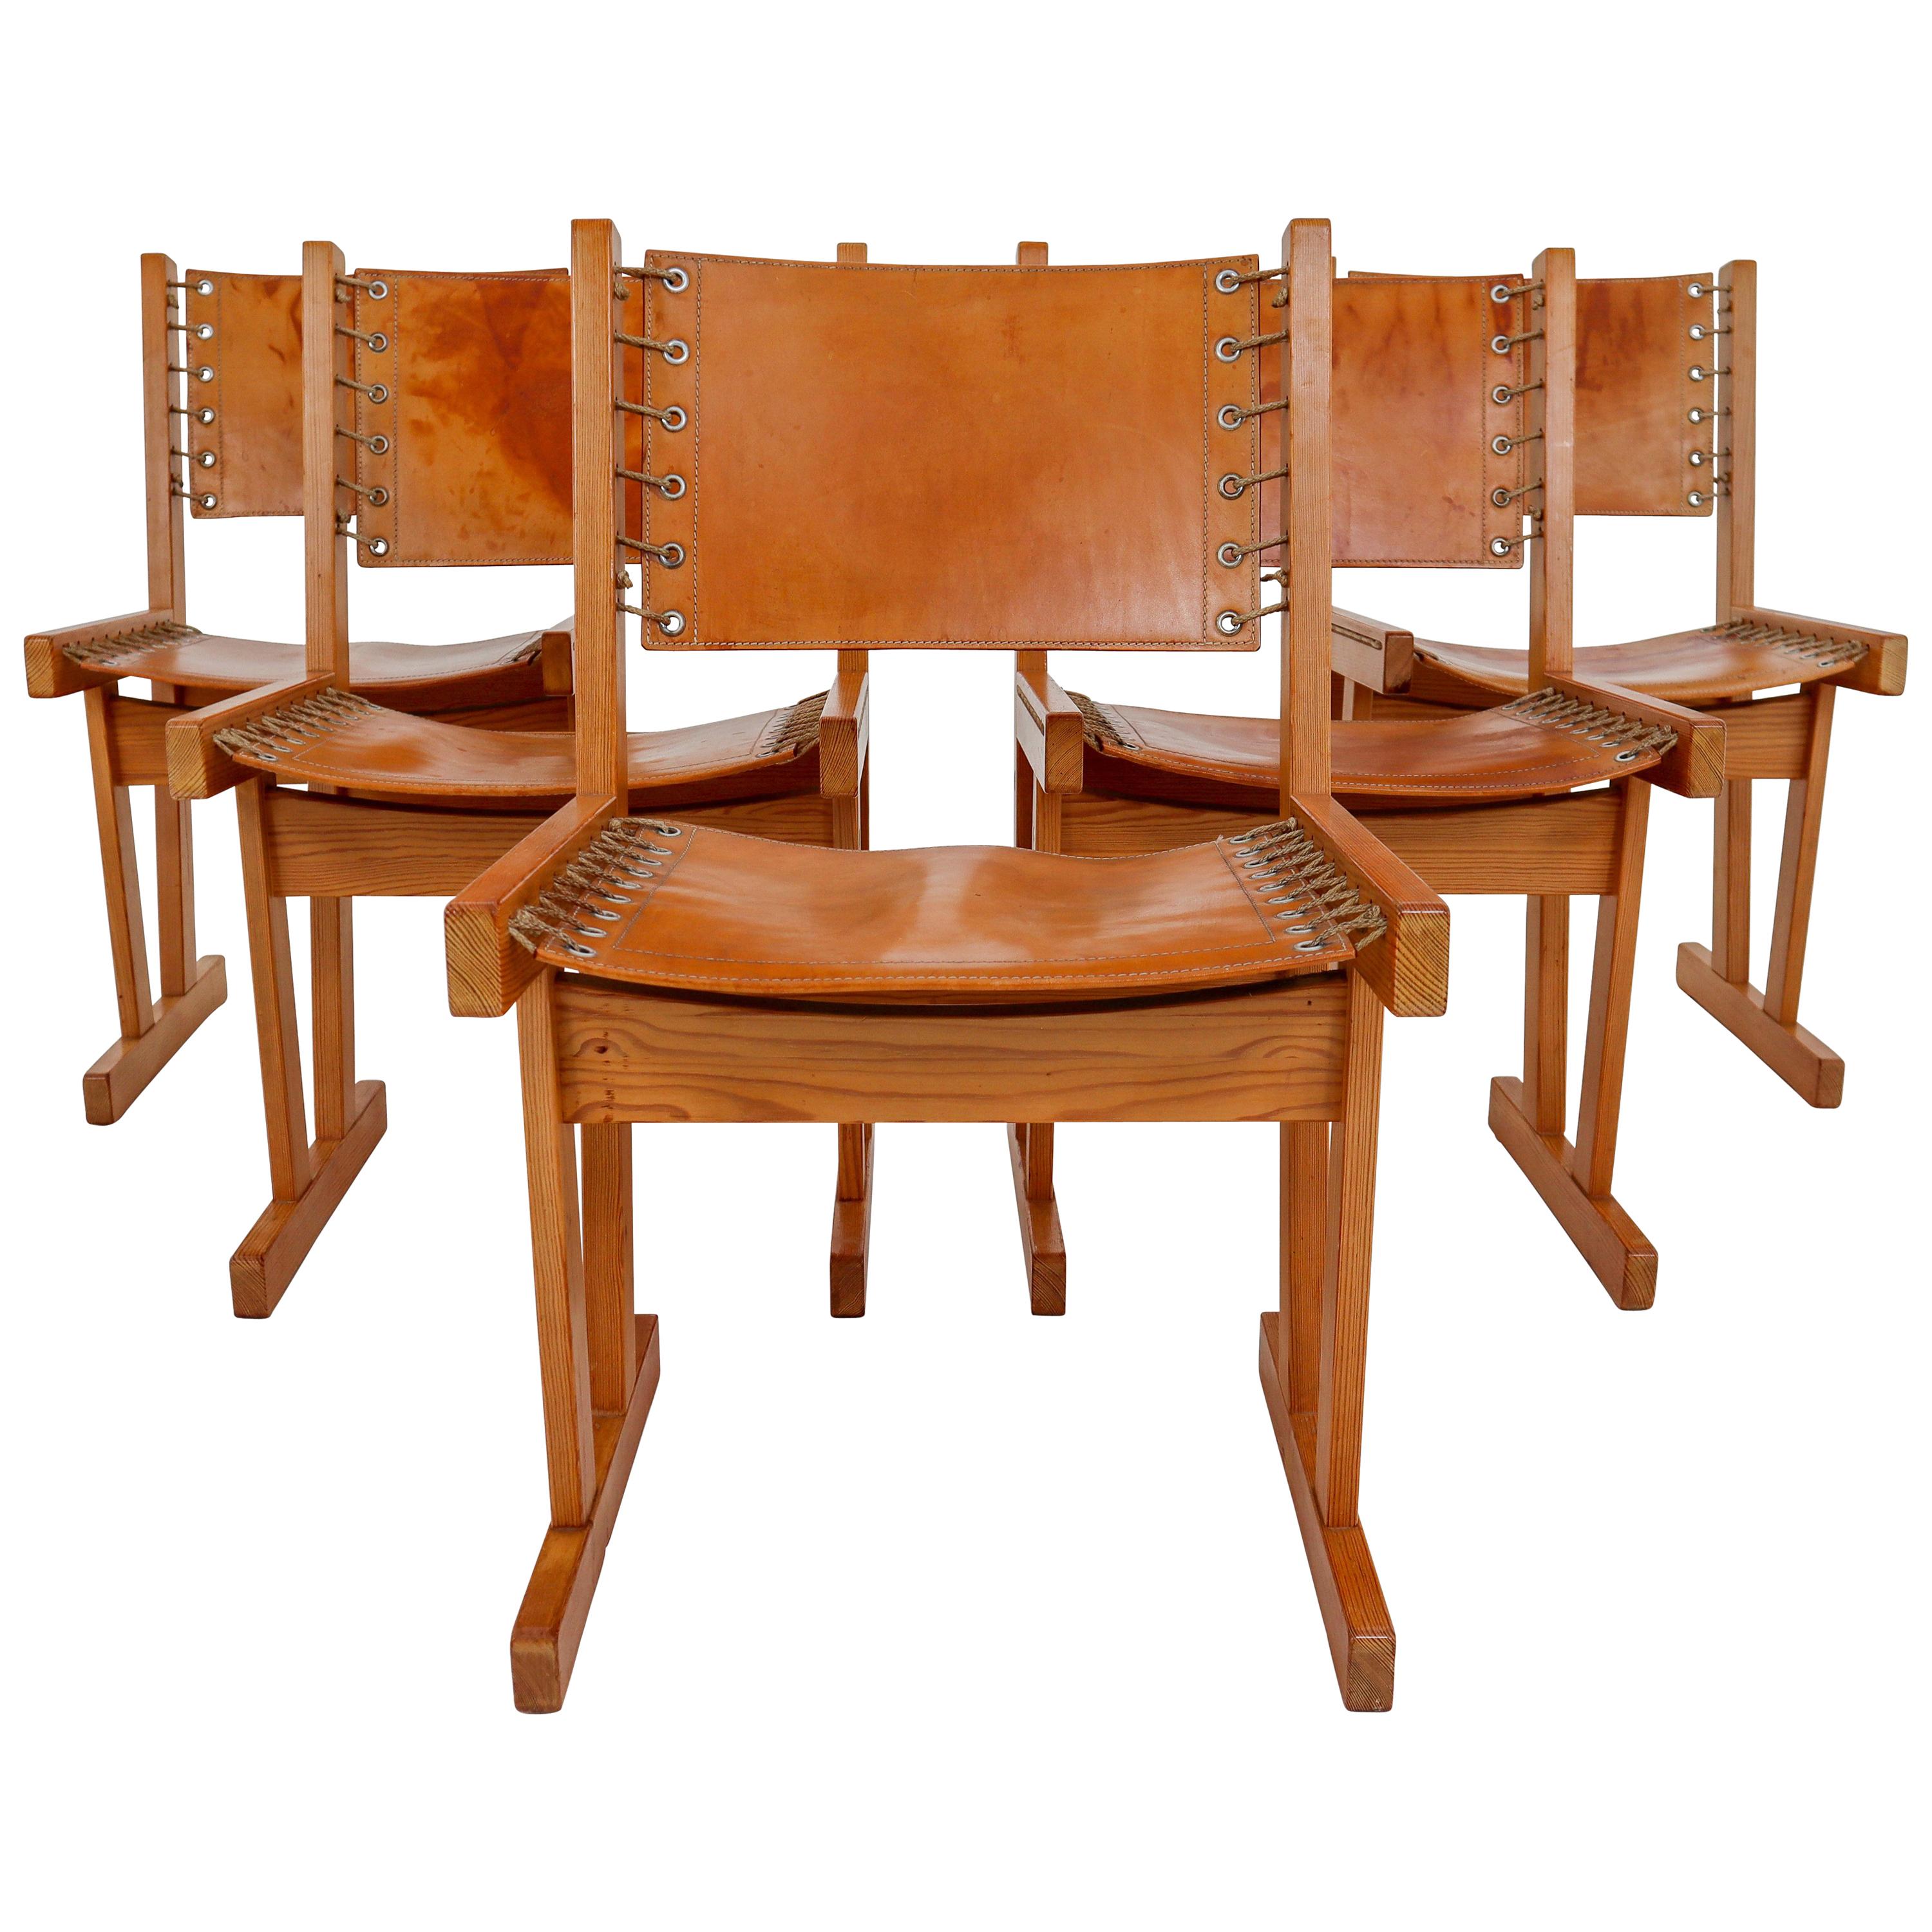 Midcentury Safari Chairs in Thick Cognac Saddle Leather and Solid Pine Wood